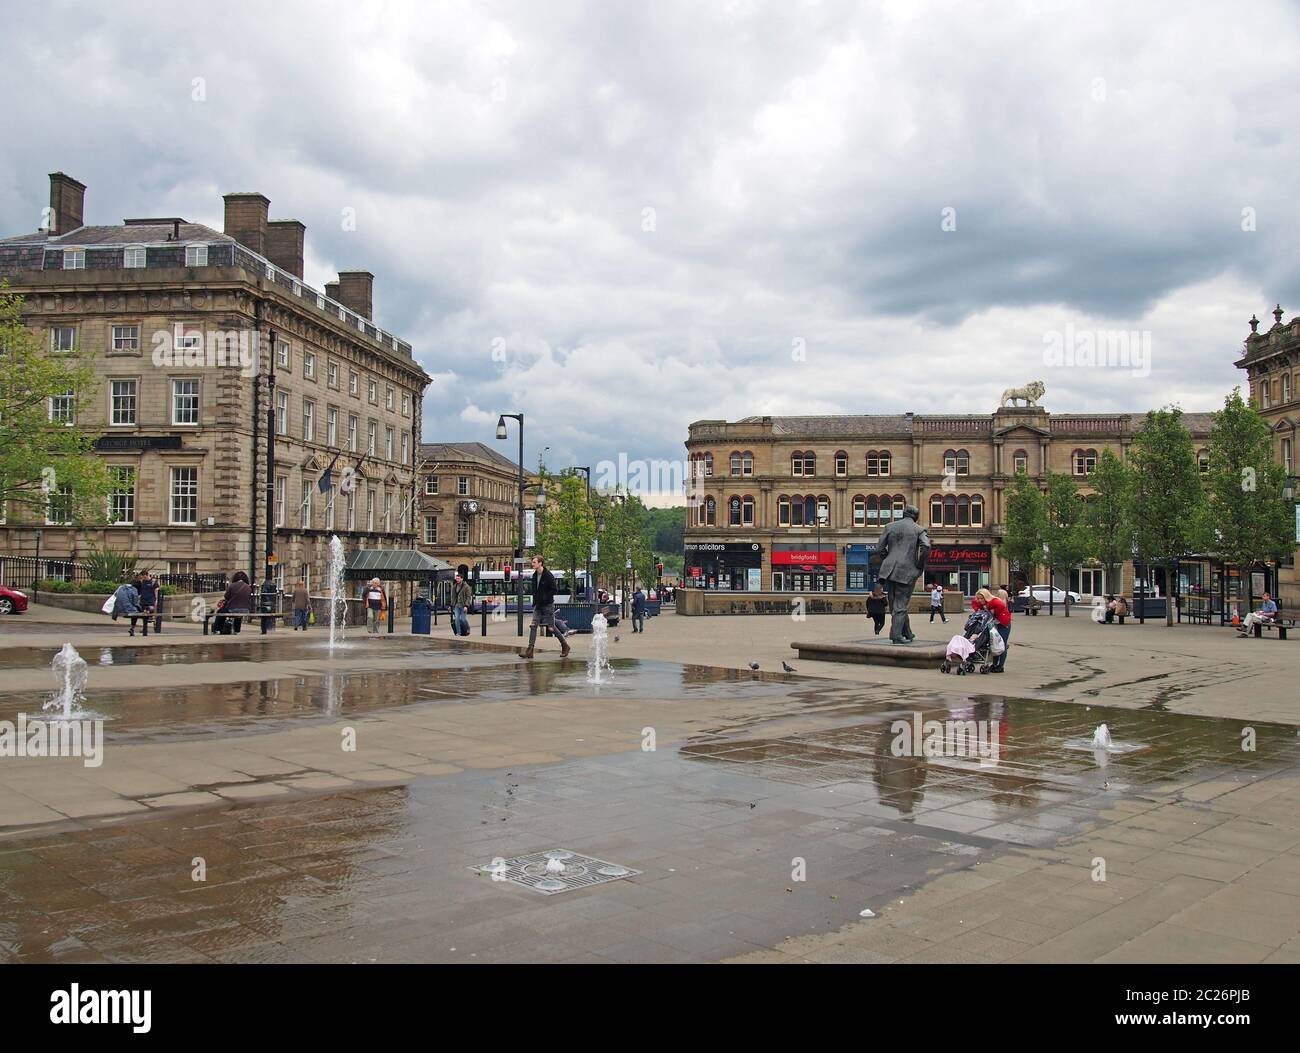 People walking in st georges square in Huddersfield between the water fountains and surrounding buildings Stock Photo